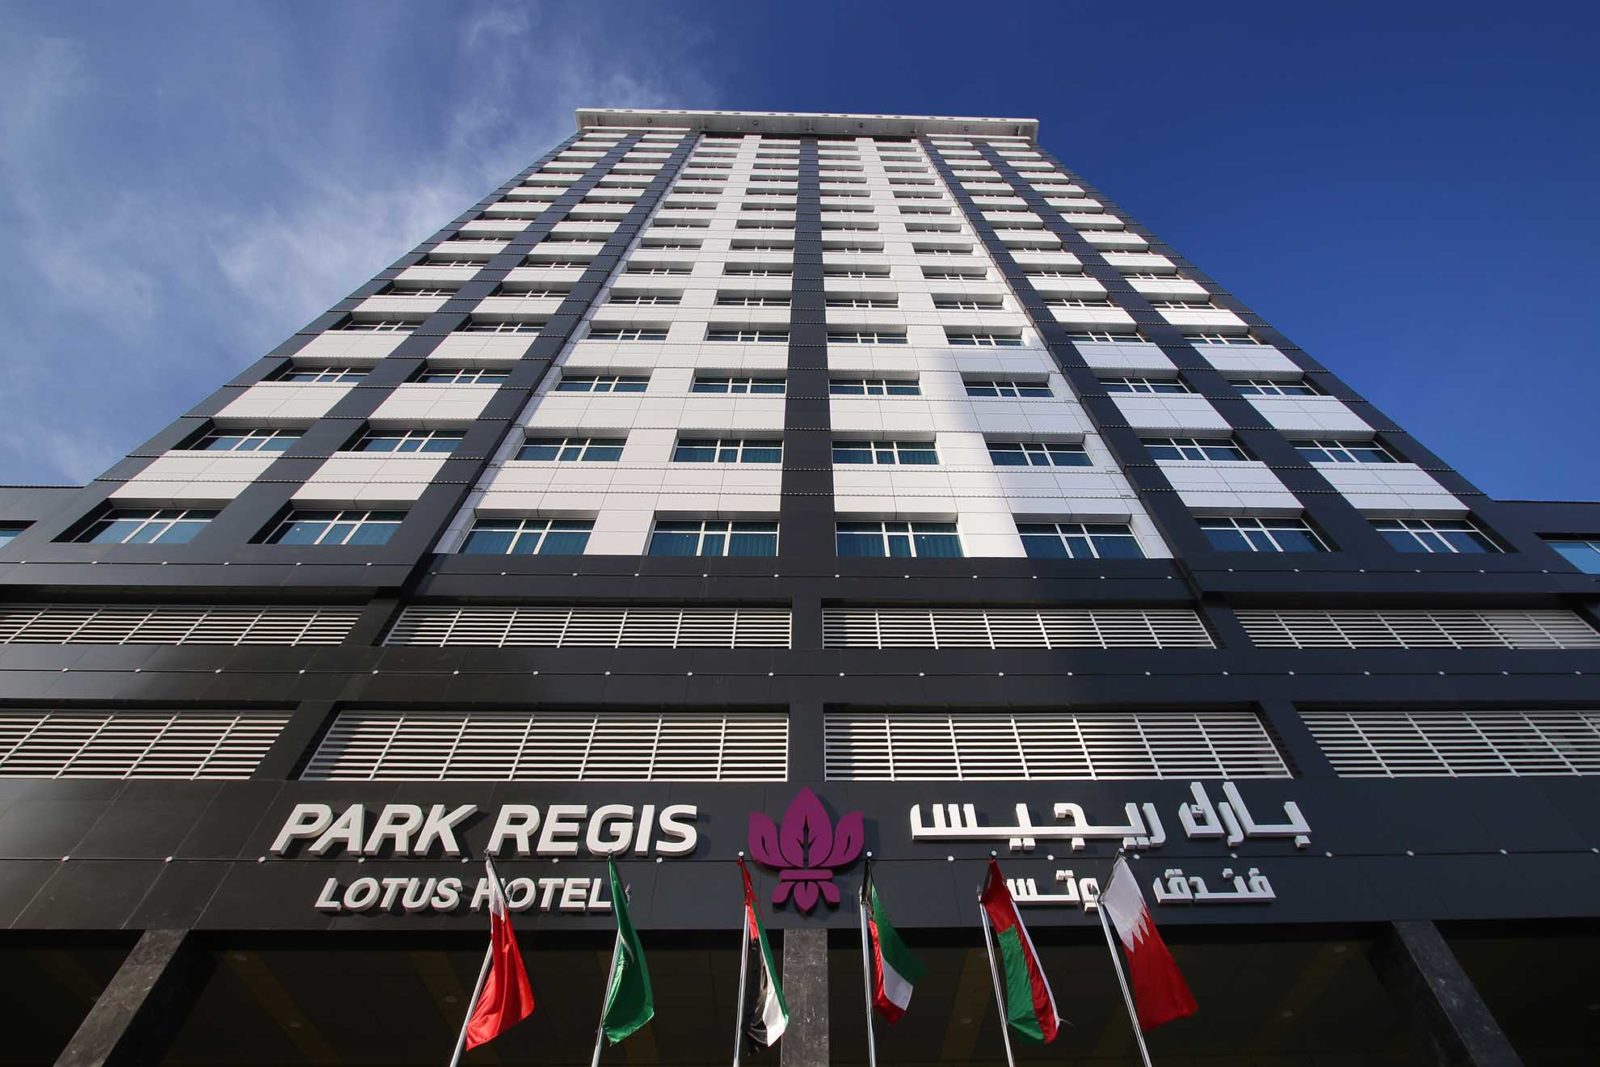 StayWell Holdings opens first property in Bahrain – Park Regis Lotus Hotel